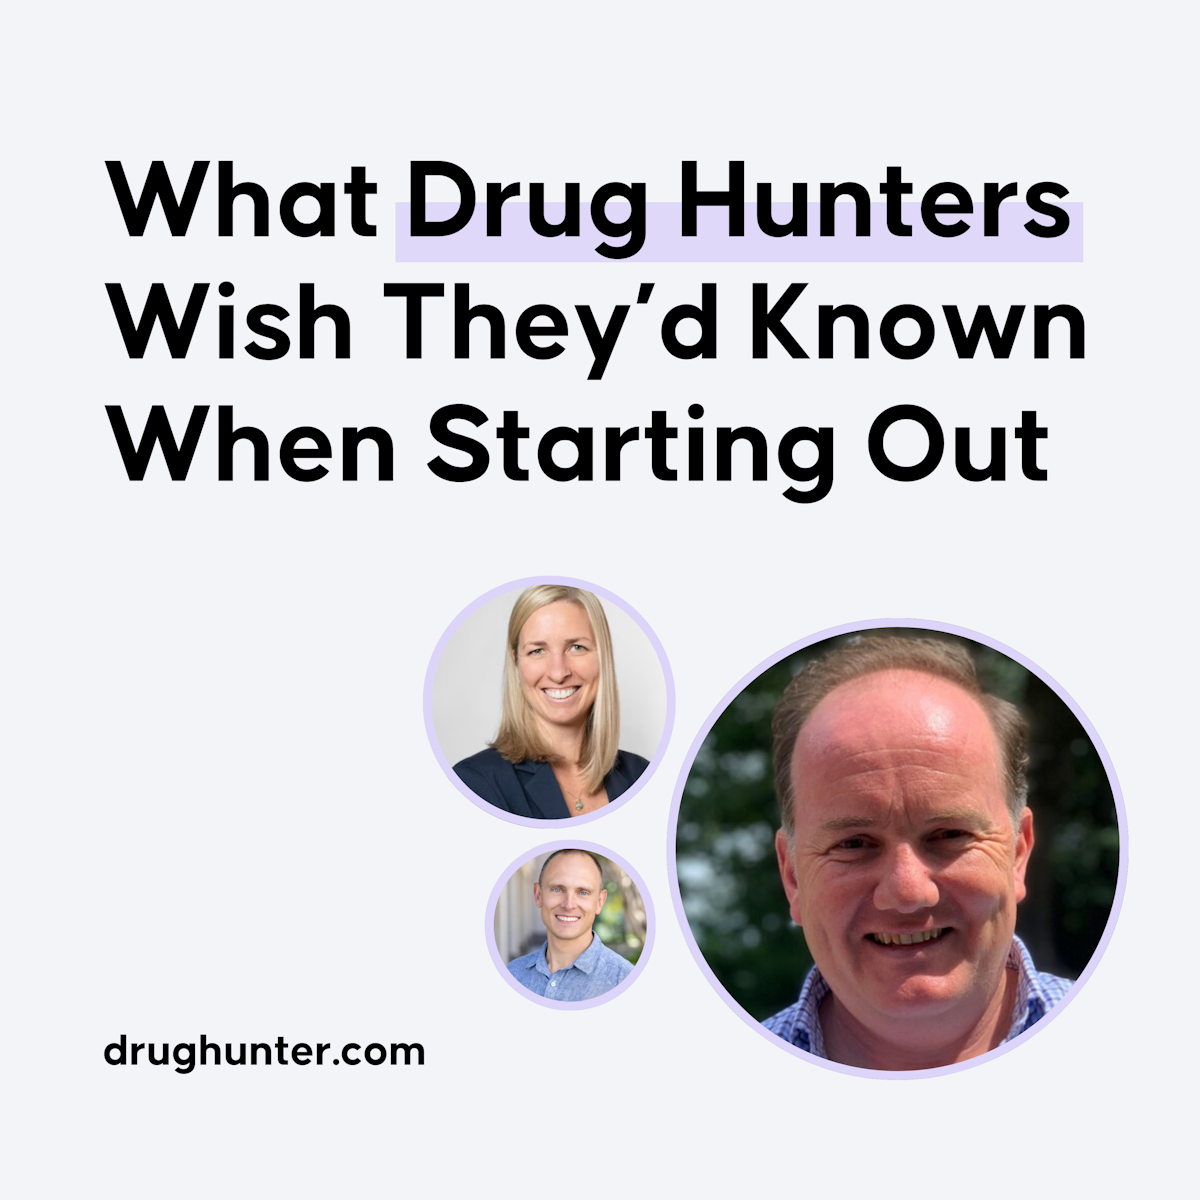 What Drug Hunters Wish They'd Known When Starting Out